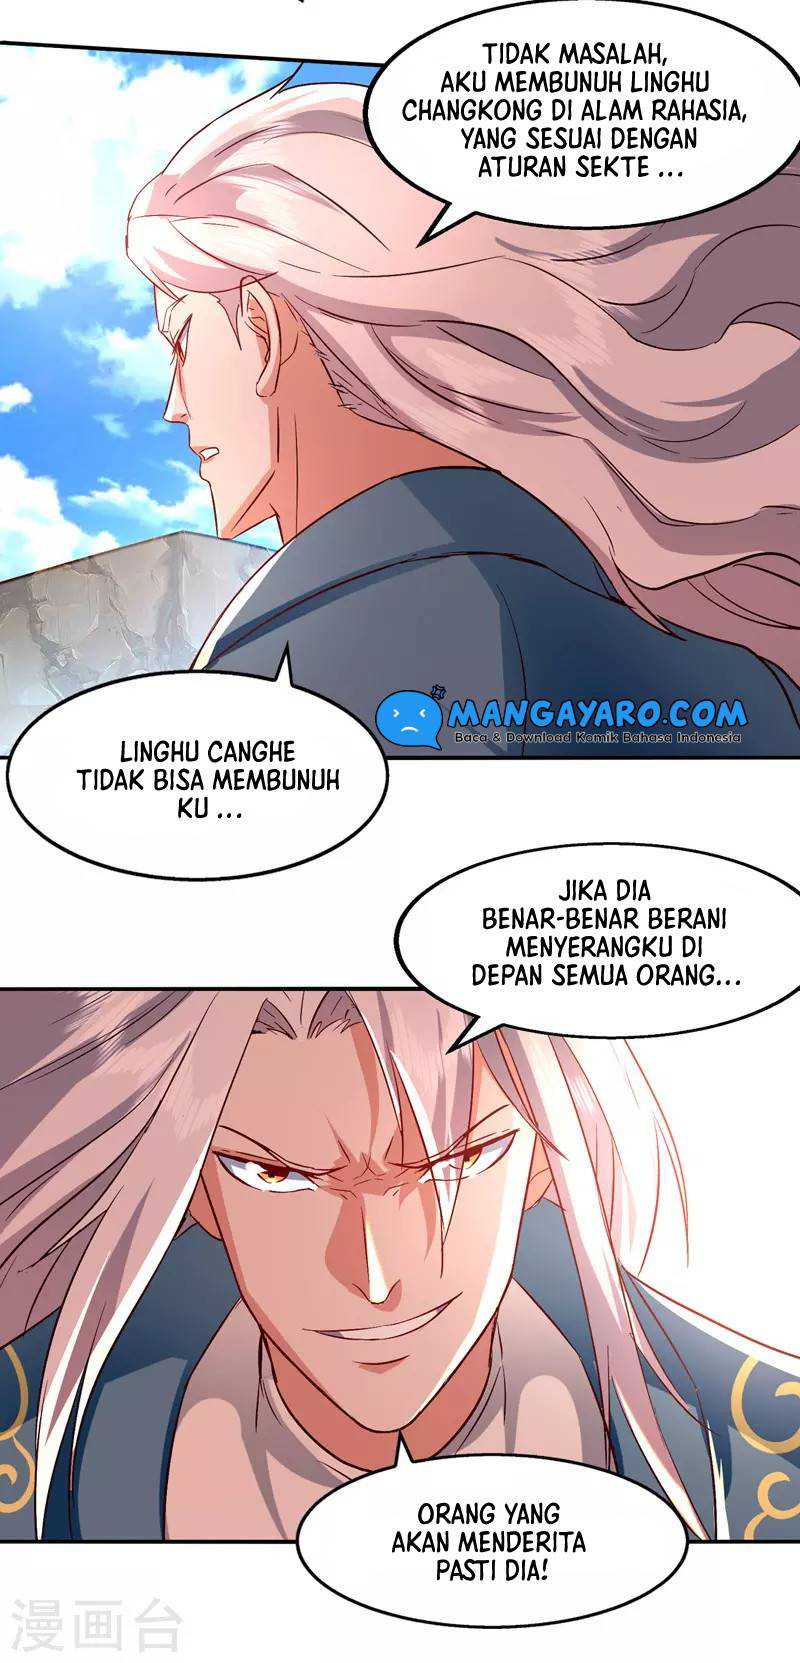 Against The Heaven Supreme (Heaven Guards) Chapter 83